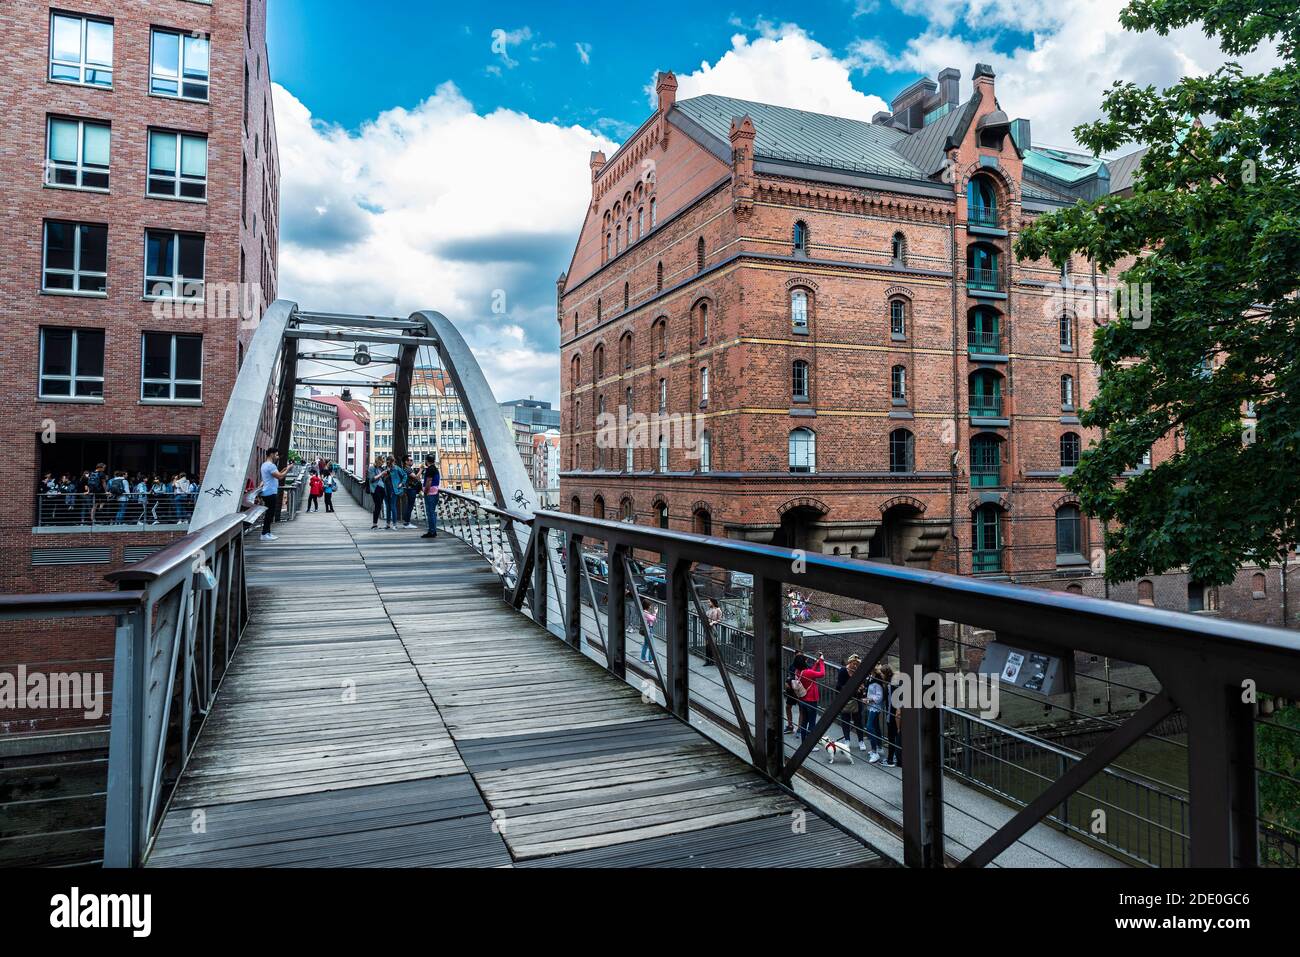 Hamburg, Germany - August 21, 2019: Pedestrian bridge over a canal with people around and an old classic warehouse in HafenCity, Hamburg, Germany Stock Photo